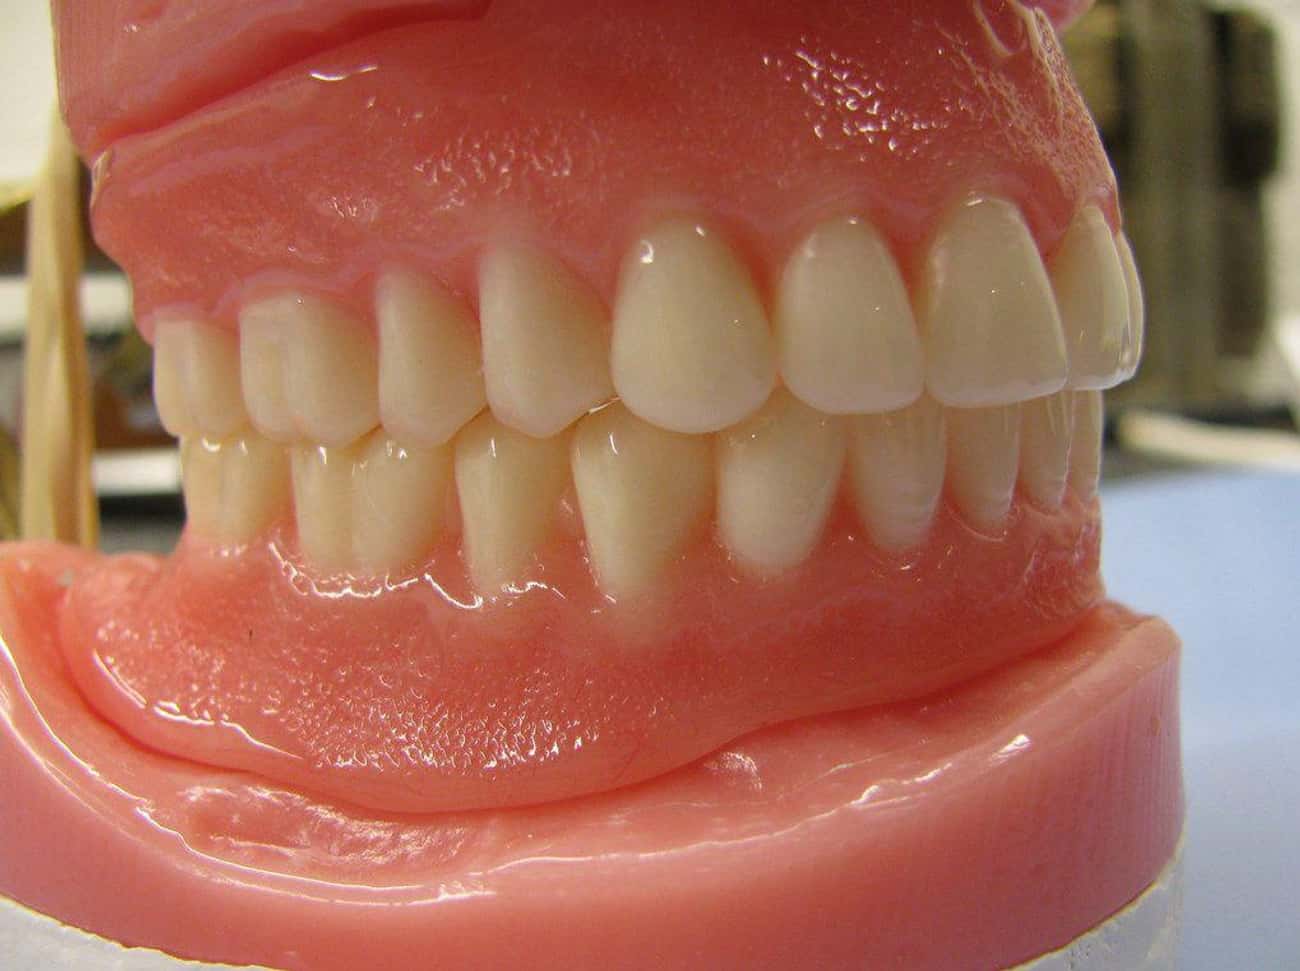 Maupin Was Previously Charged With Murder - And Received His Dentures In Prison